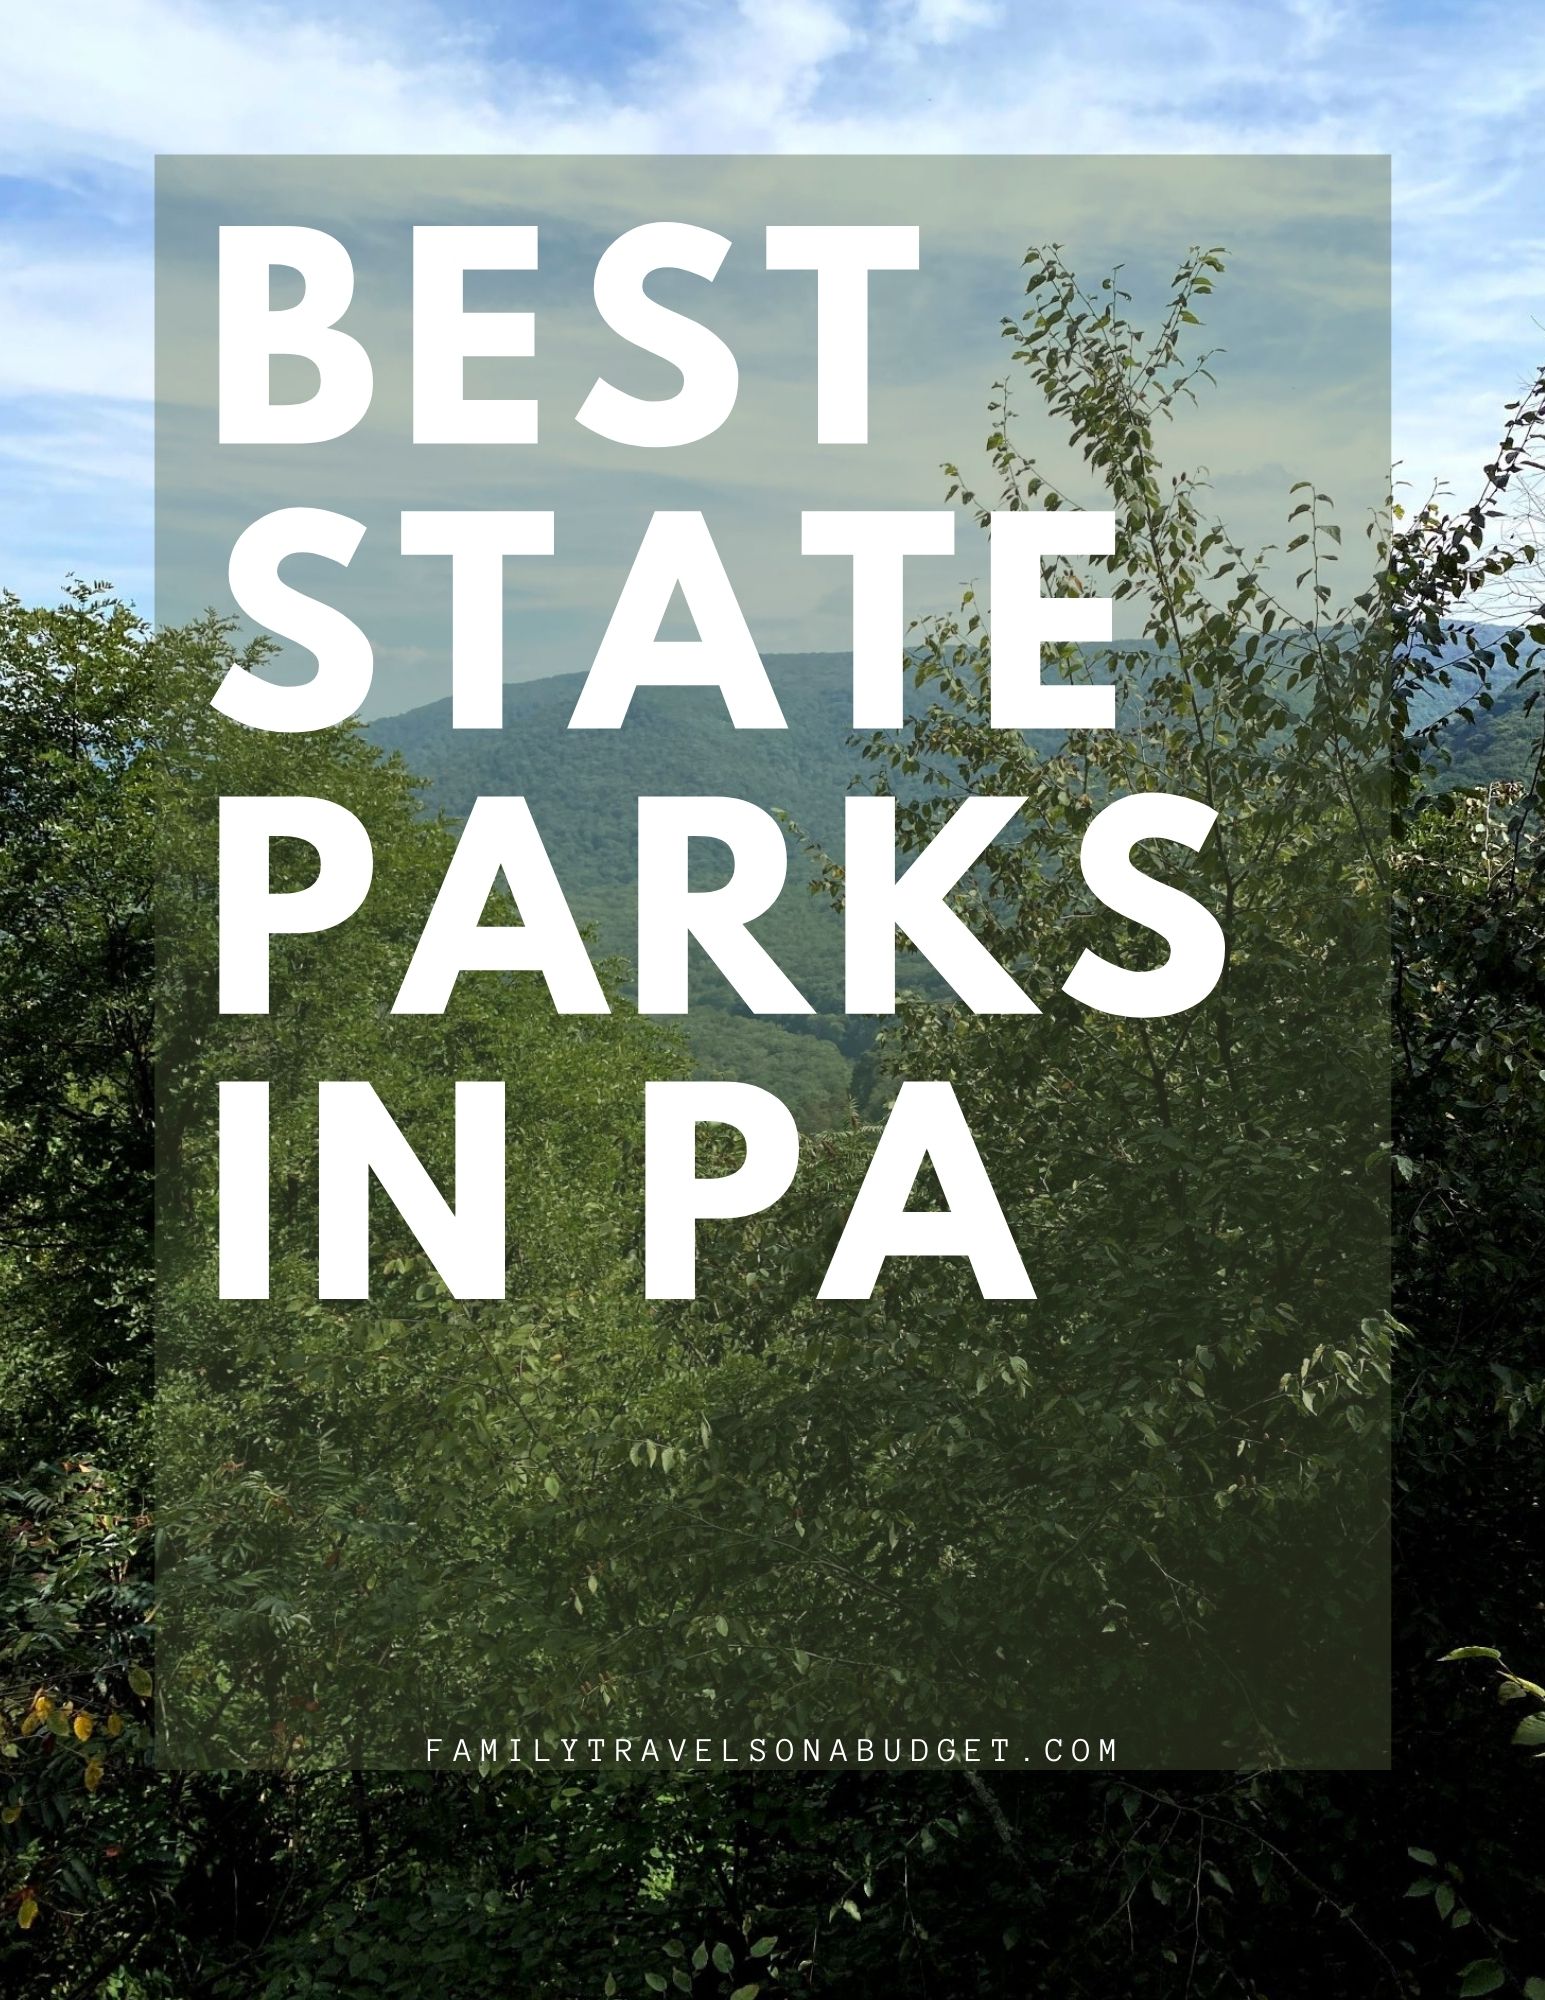 Guide to the best state parks in Pennsylvania. Includes Ohiopyle, the largest state park; Presque Isle, the most visited state park, and many more. Find hiking, fishing, mountains, beaches and so much more.  via @karendawkins